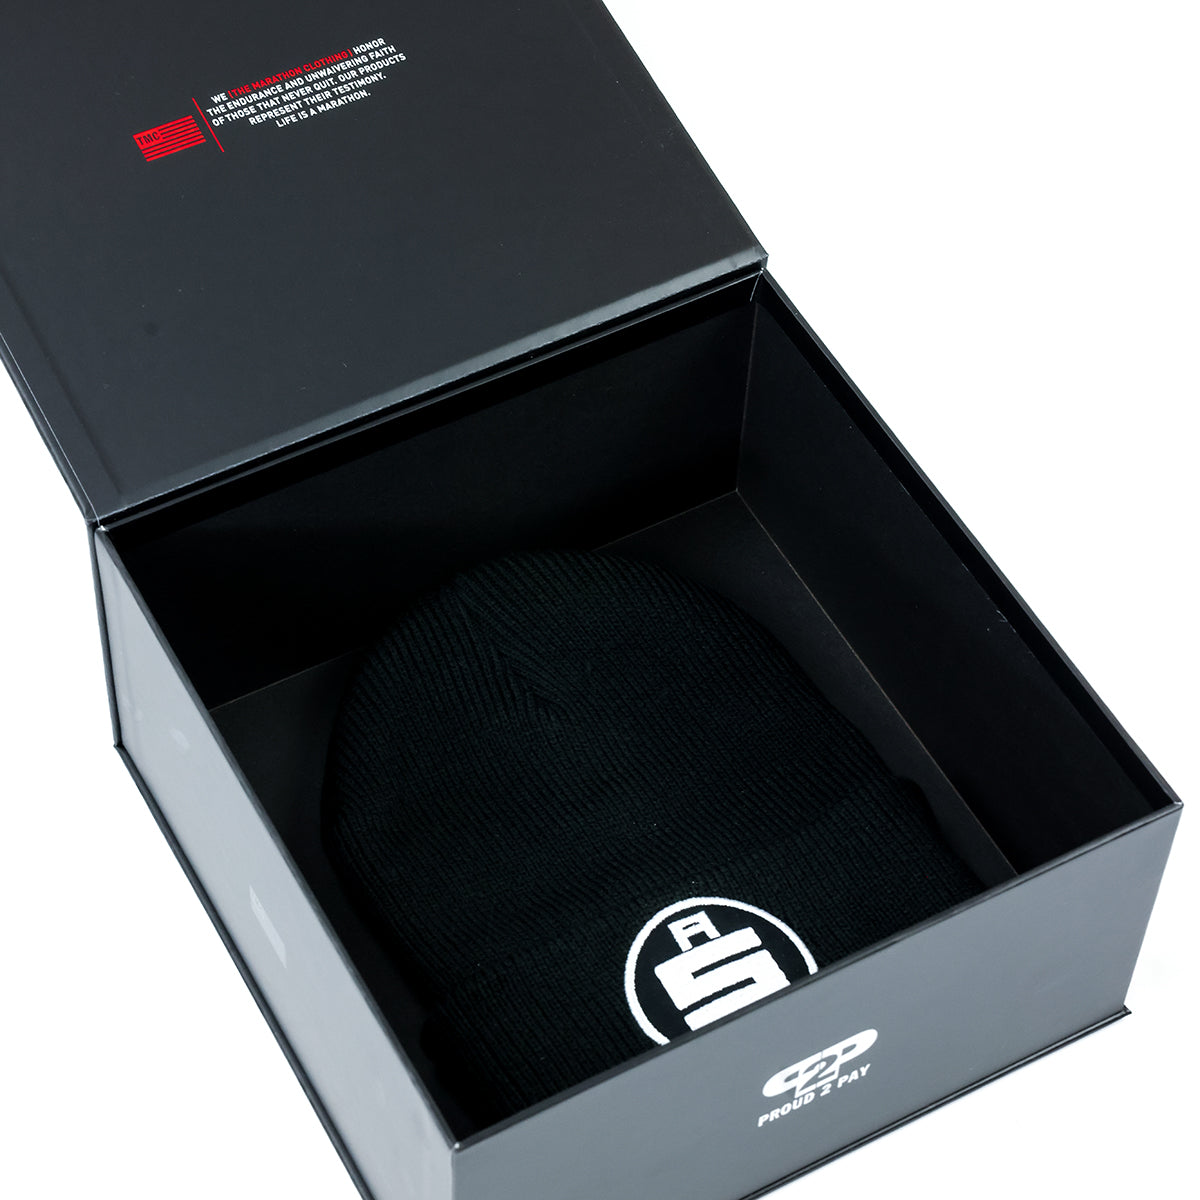 All Money In Limited Edition Heavyweight Beanie - Black/White with Custom Box.